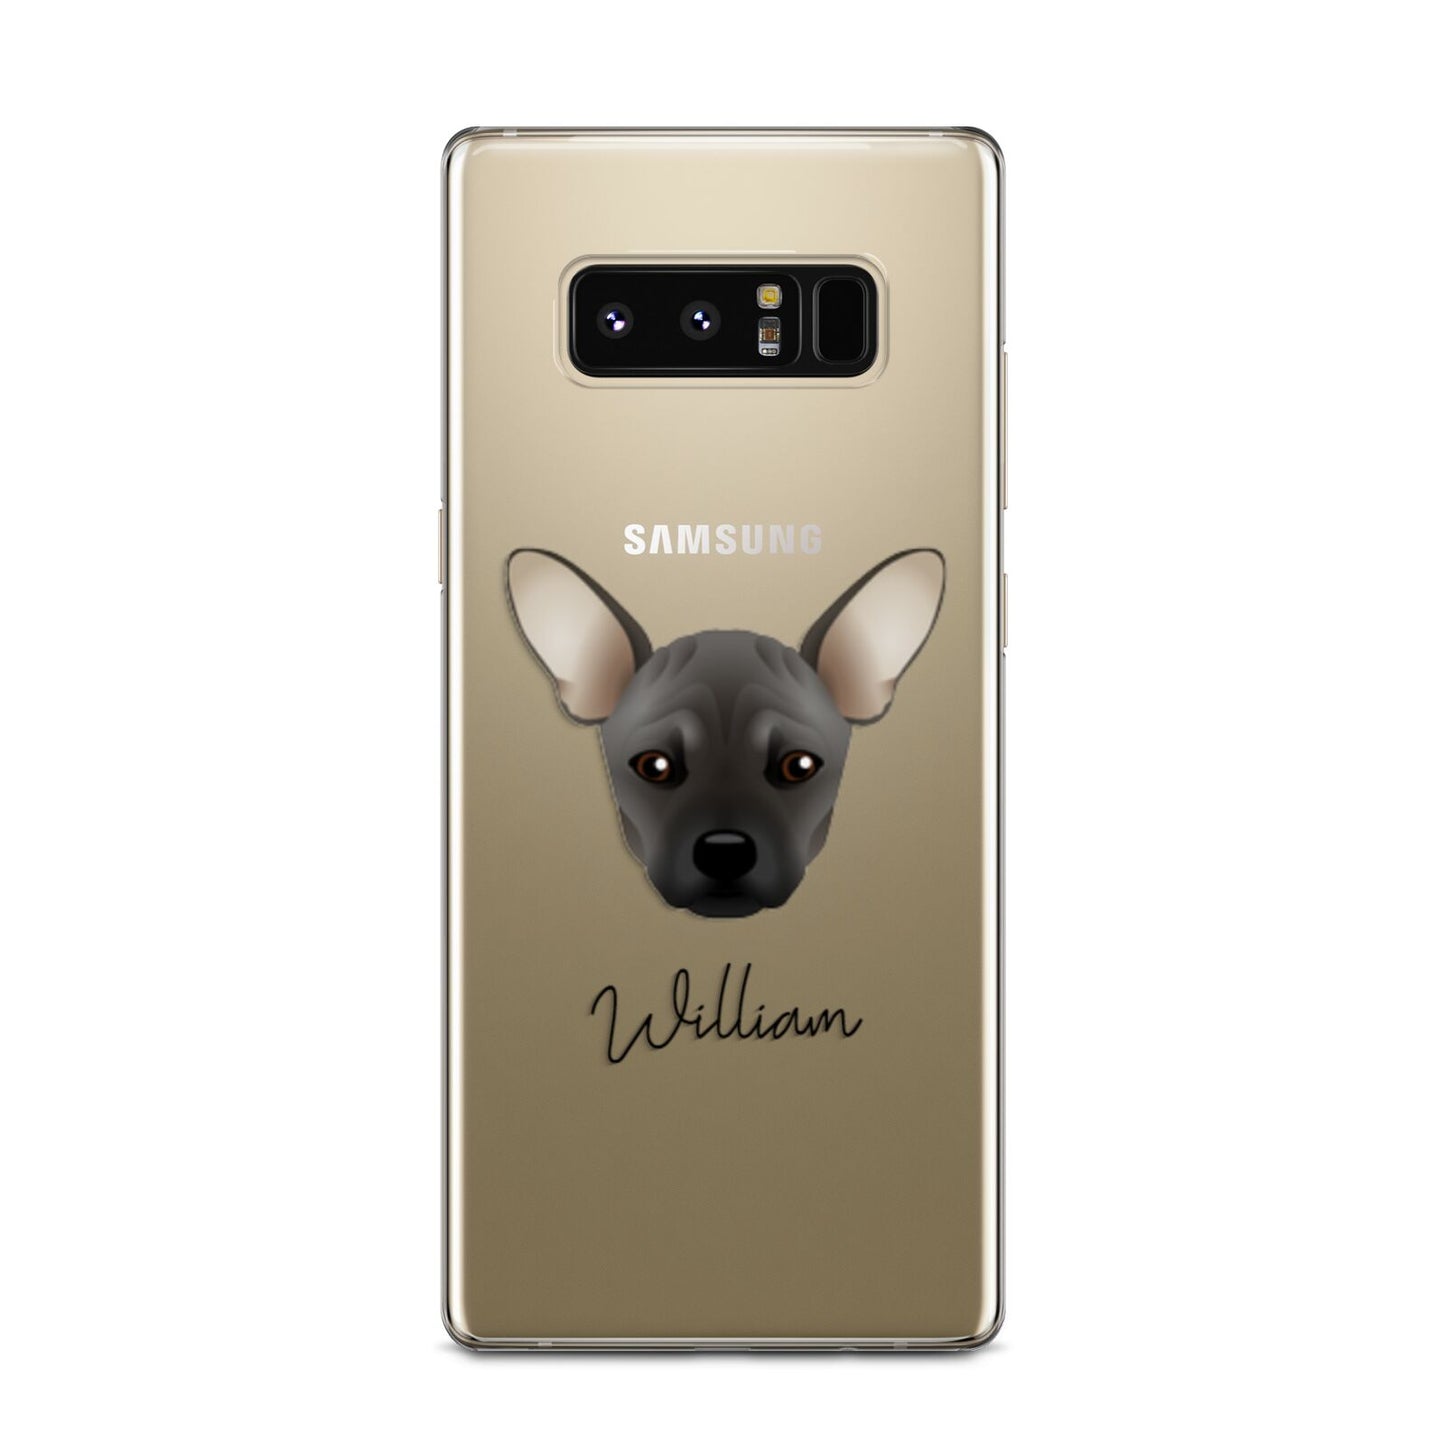 French Pin Personalised Samsung Galaxy Note 8 Case